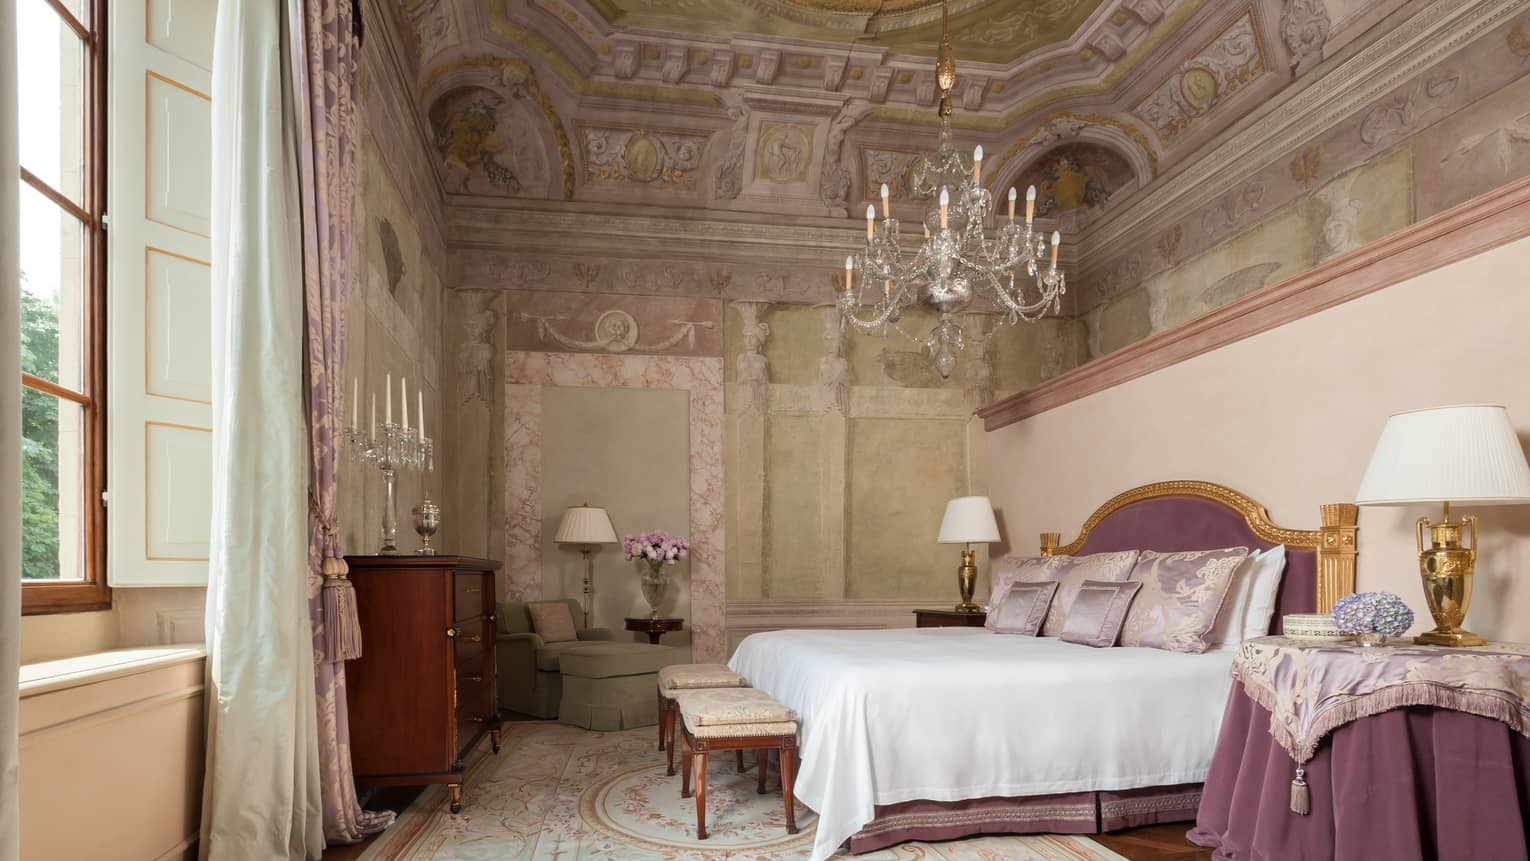 Frescoed Executive Suite bed with purple velvet headboard, nightstand with cloth under chandelier, vaulted ceiling